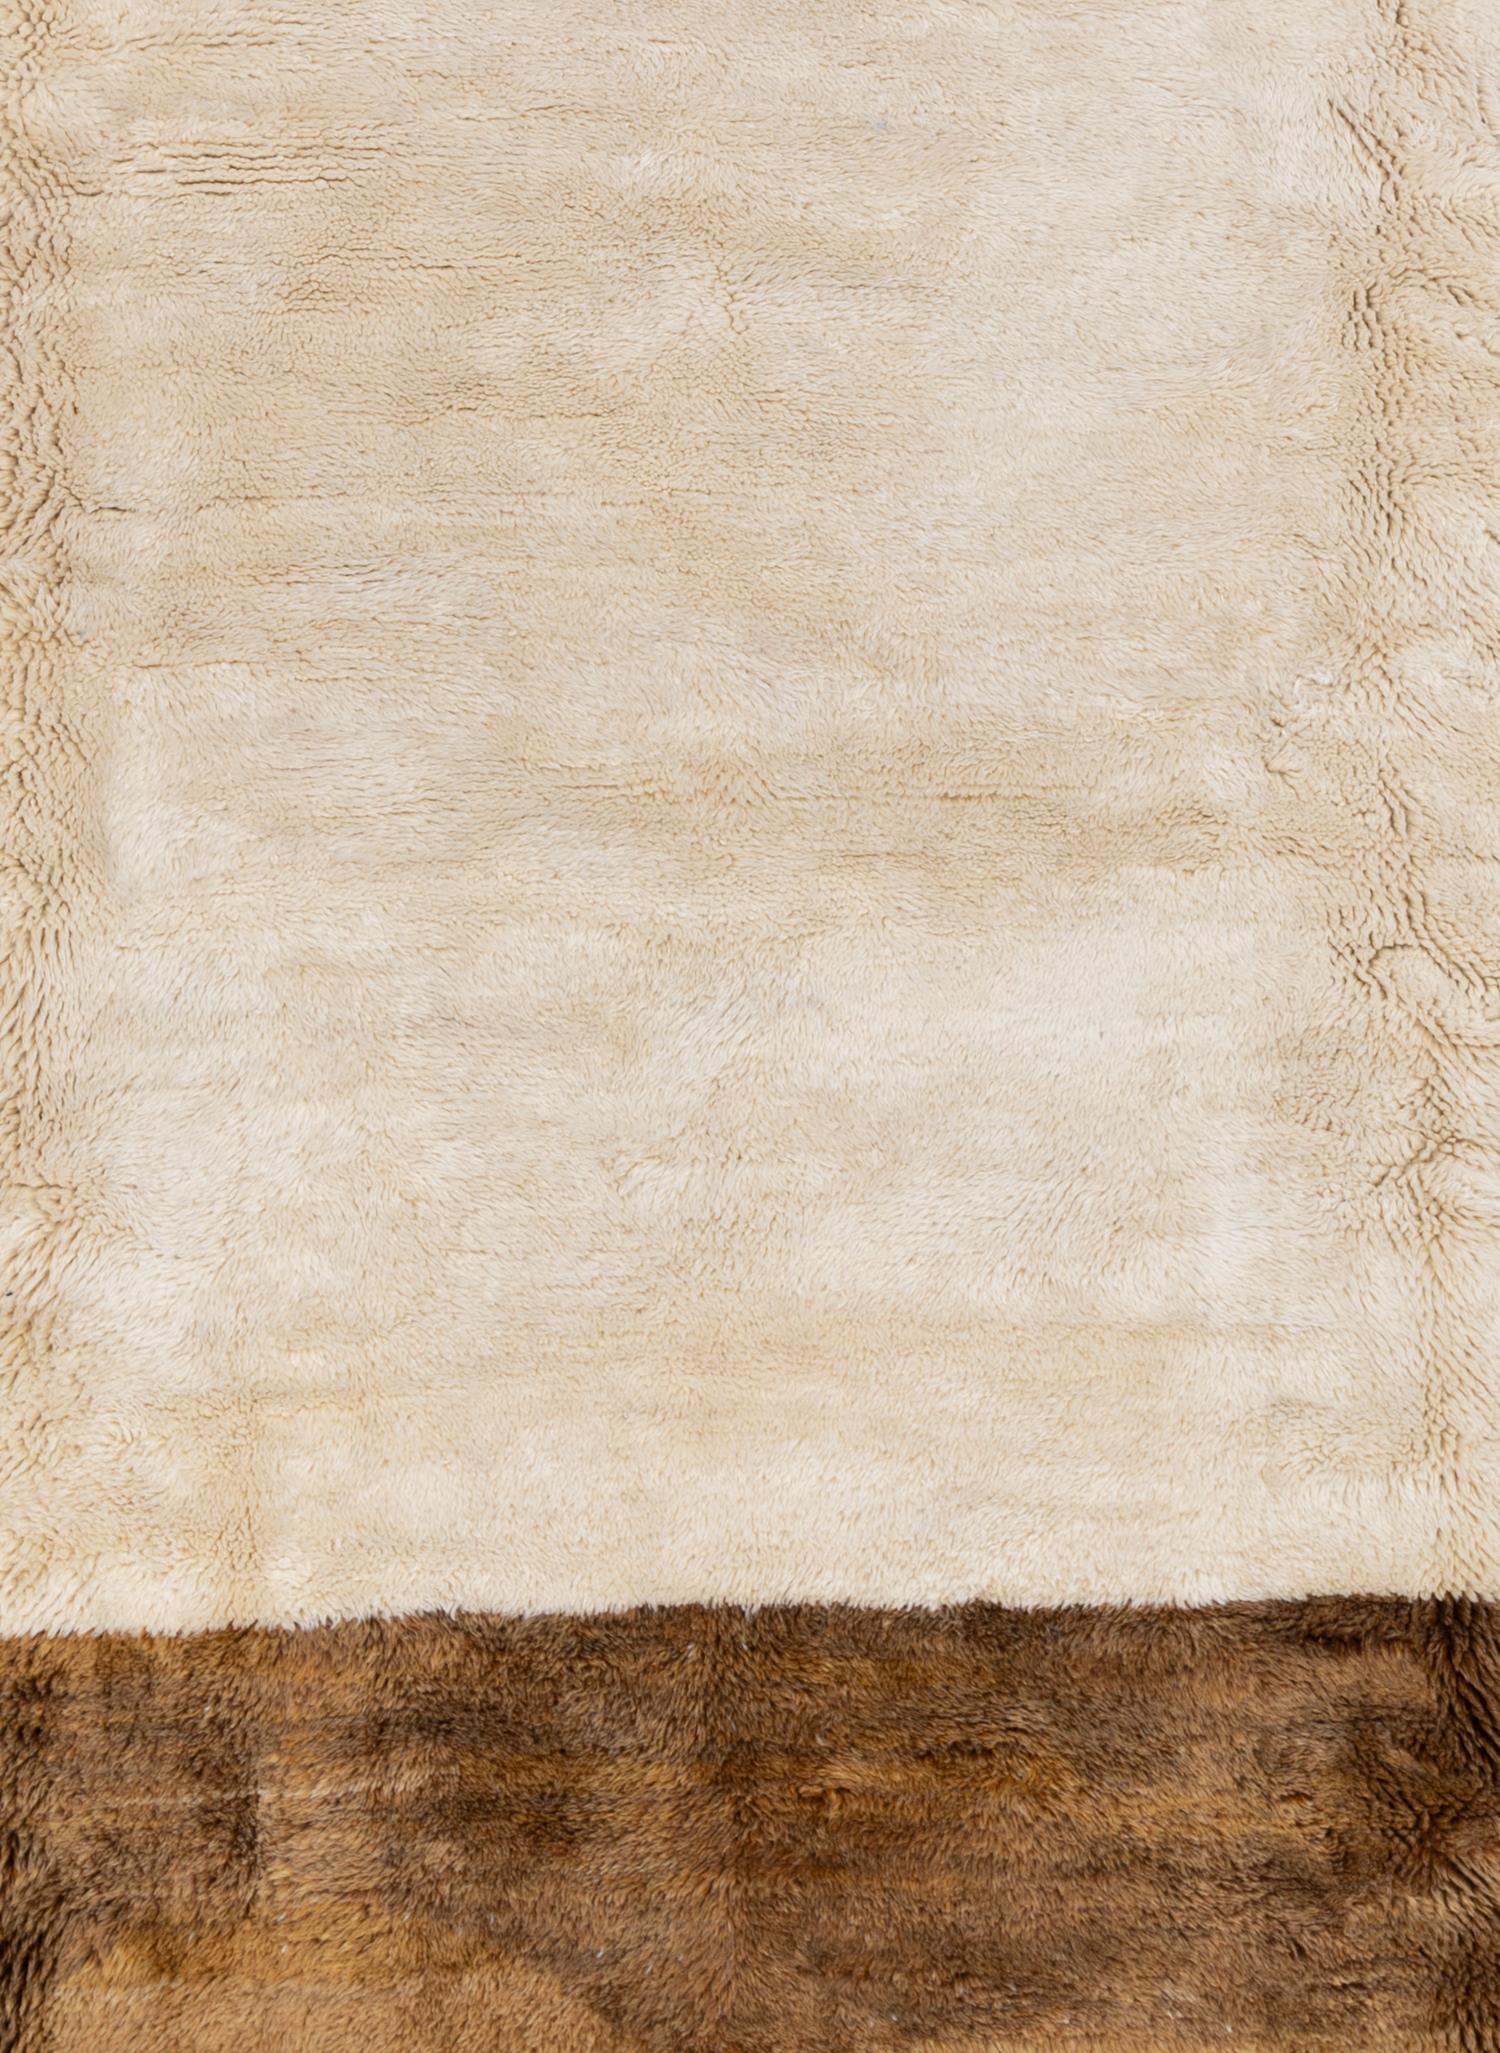 Woven in Morocco using techniques that have been around for decades, this handmade rug features a warm cream and light mocha color blocking. Can also be made to order in your desired size. 

Wear Guide: New

Wear Notes:
Vintage and antique rugs